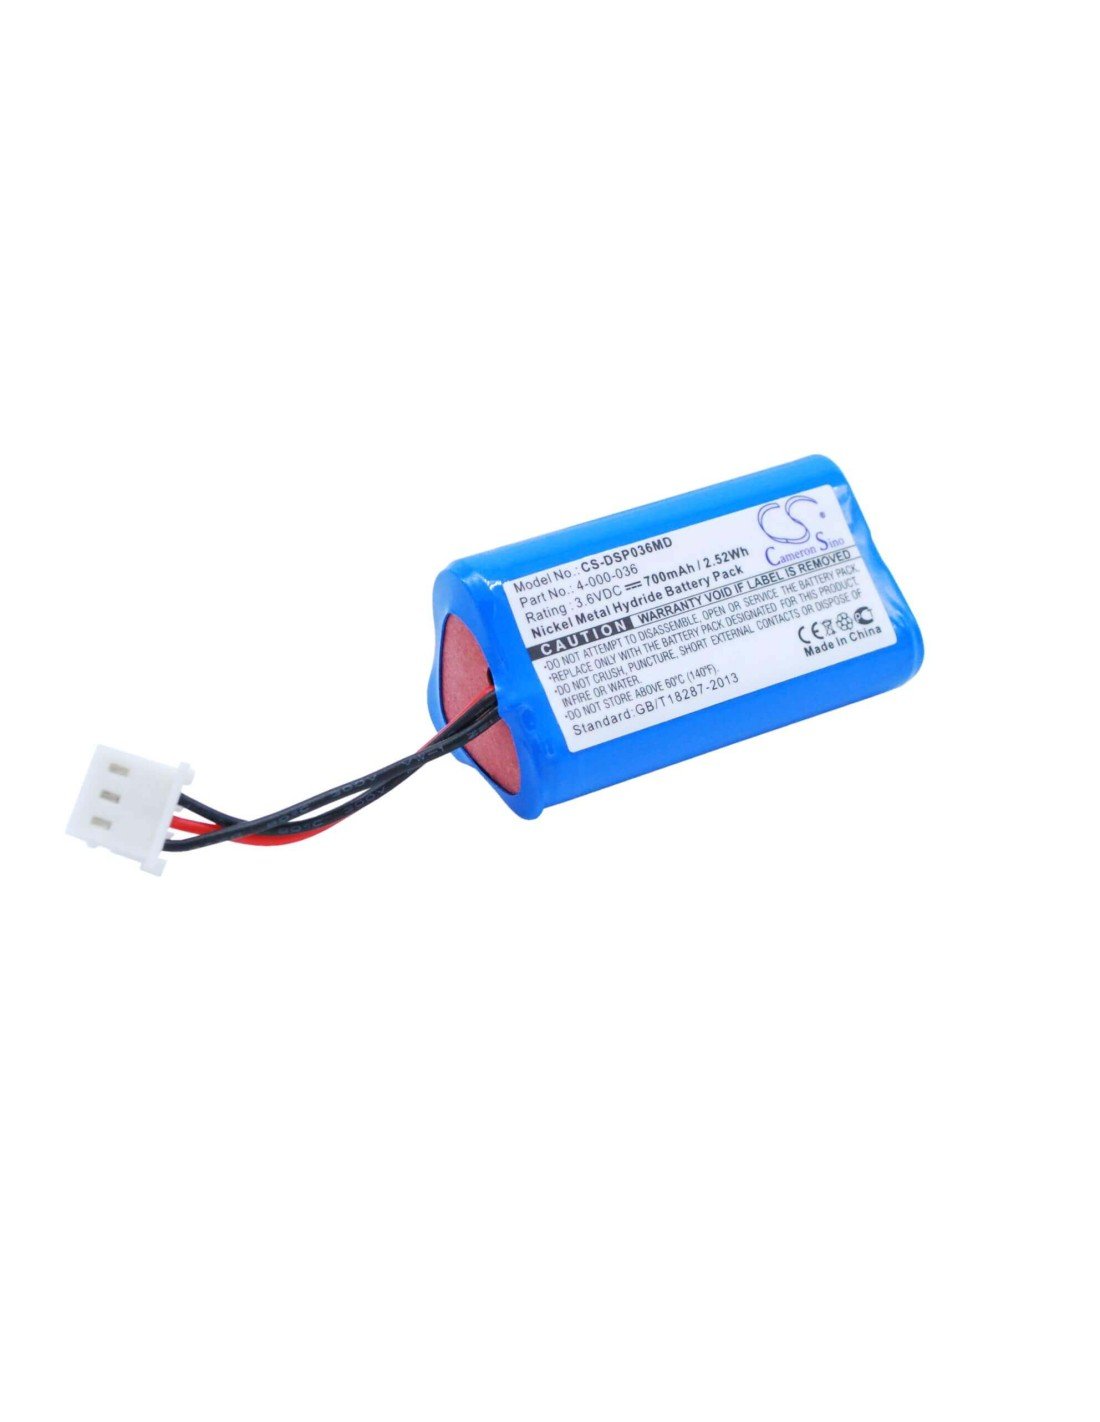 Battery for Drummond Scientific Portable Pipet-aid Xl, Portable Pipet-aid Xp2, Portable Pipet-aid Pk 3.6V, 700mAh - 2.52Wh